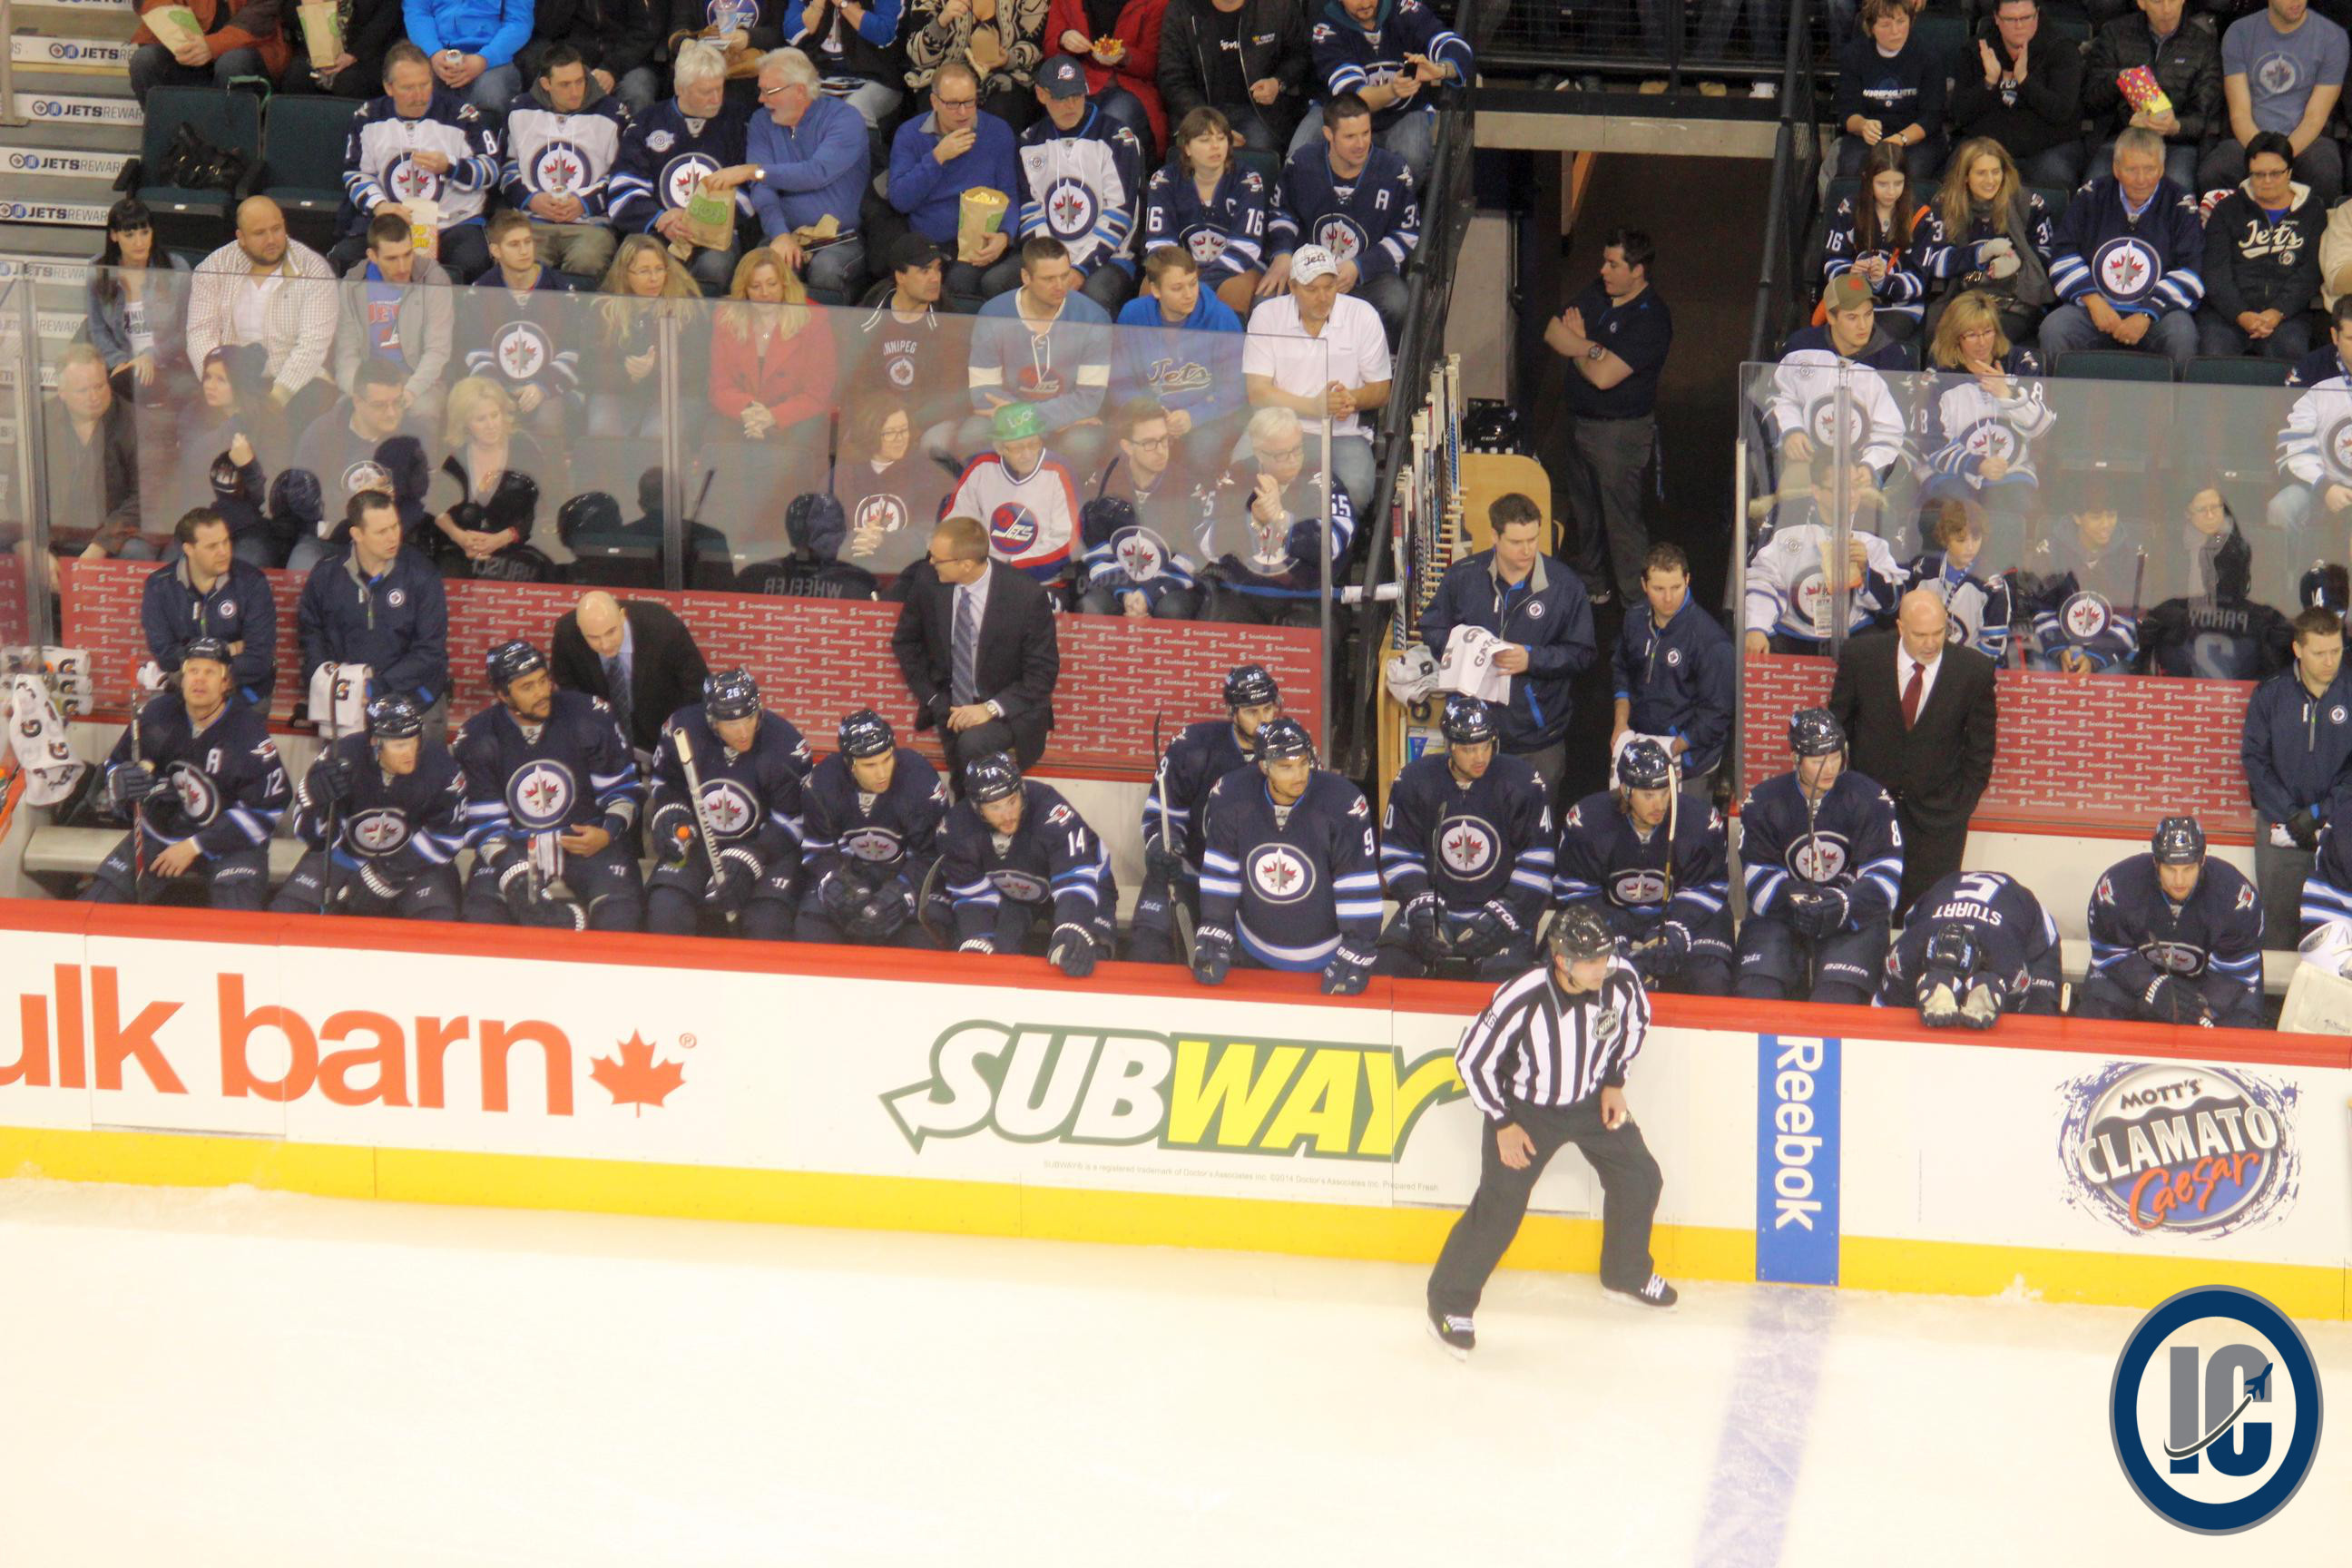 Jets bench March 16 2014